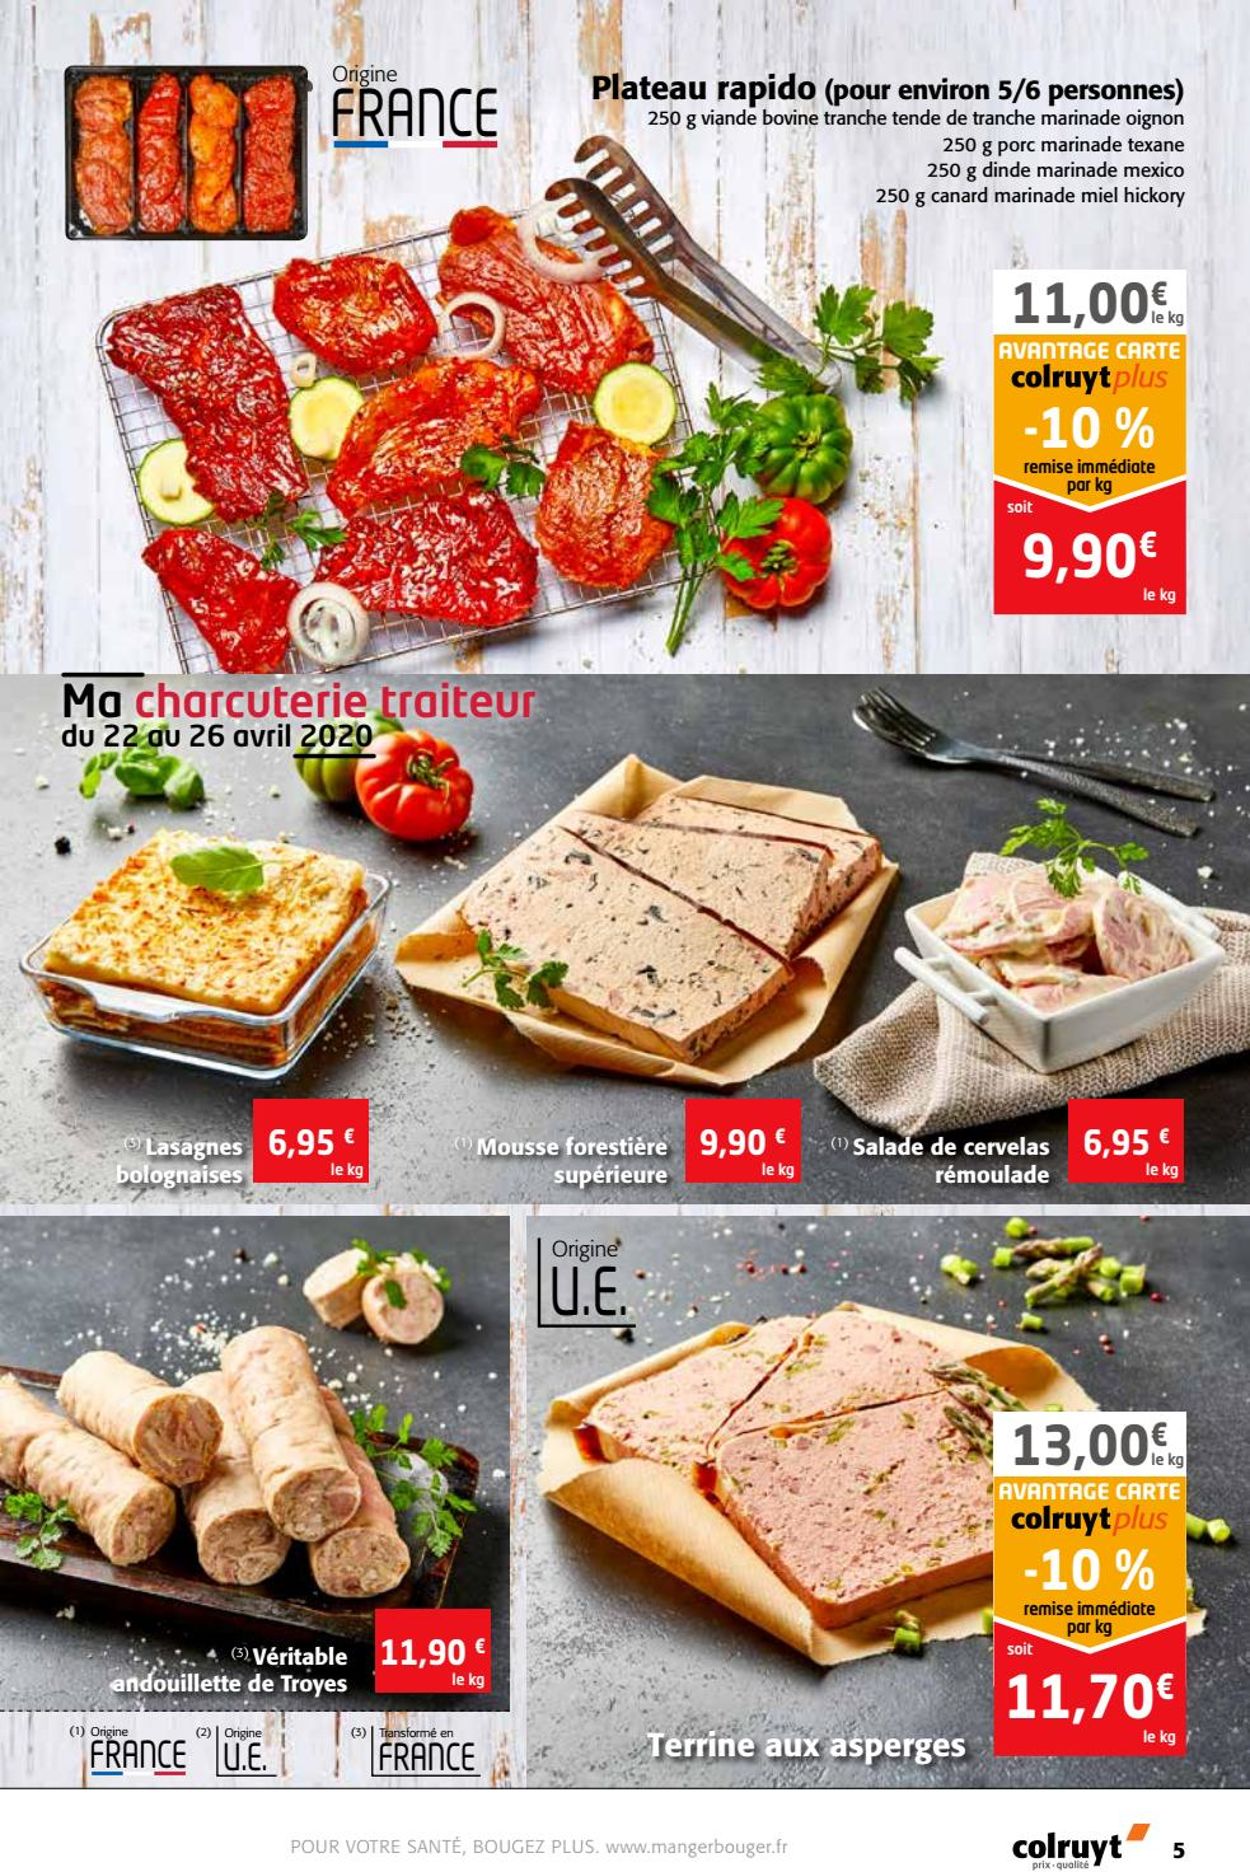 Colruyt Catalogue - 22.04-03.05.2020 (Page 5)